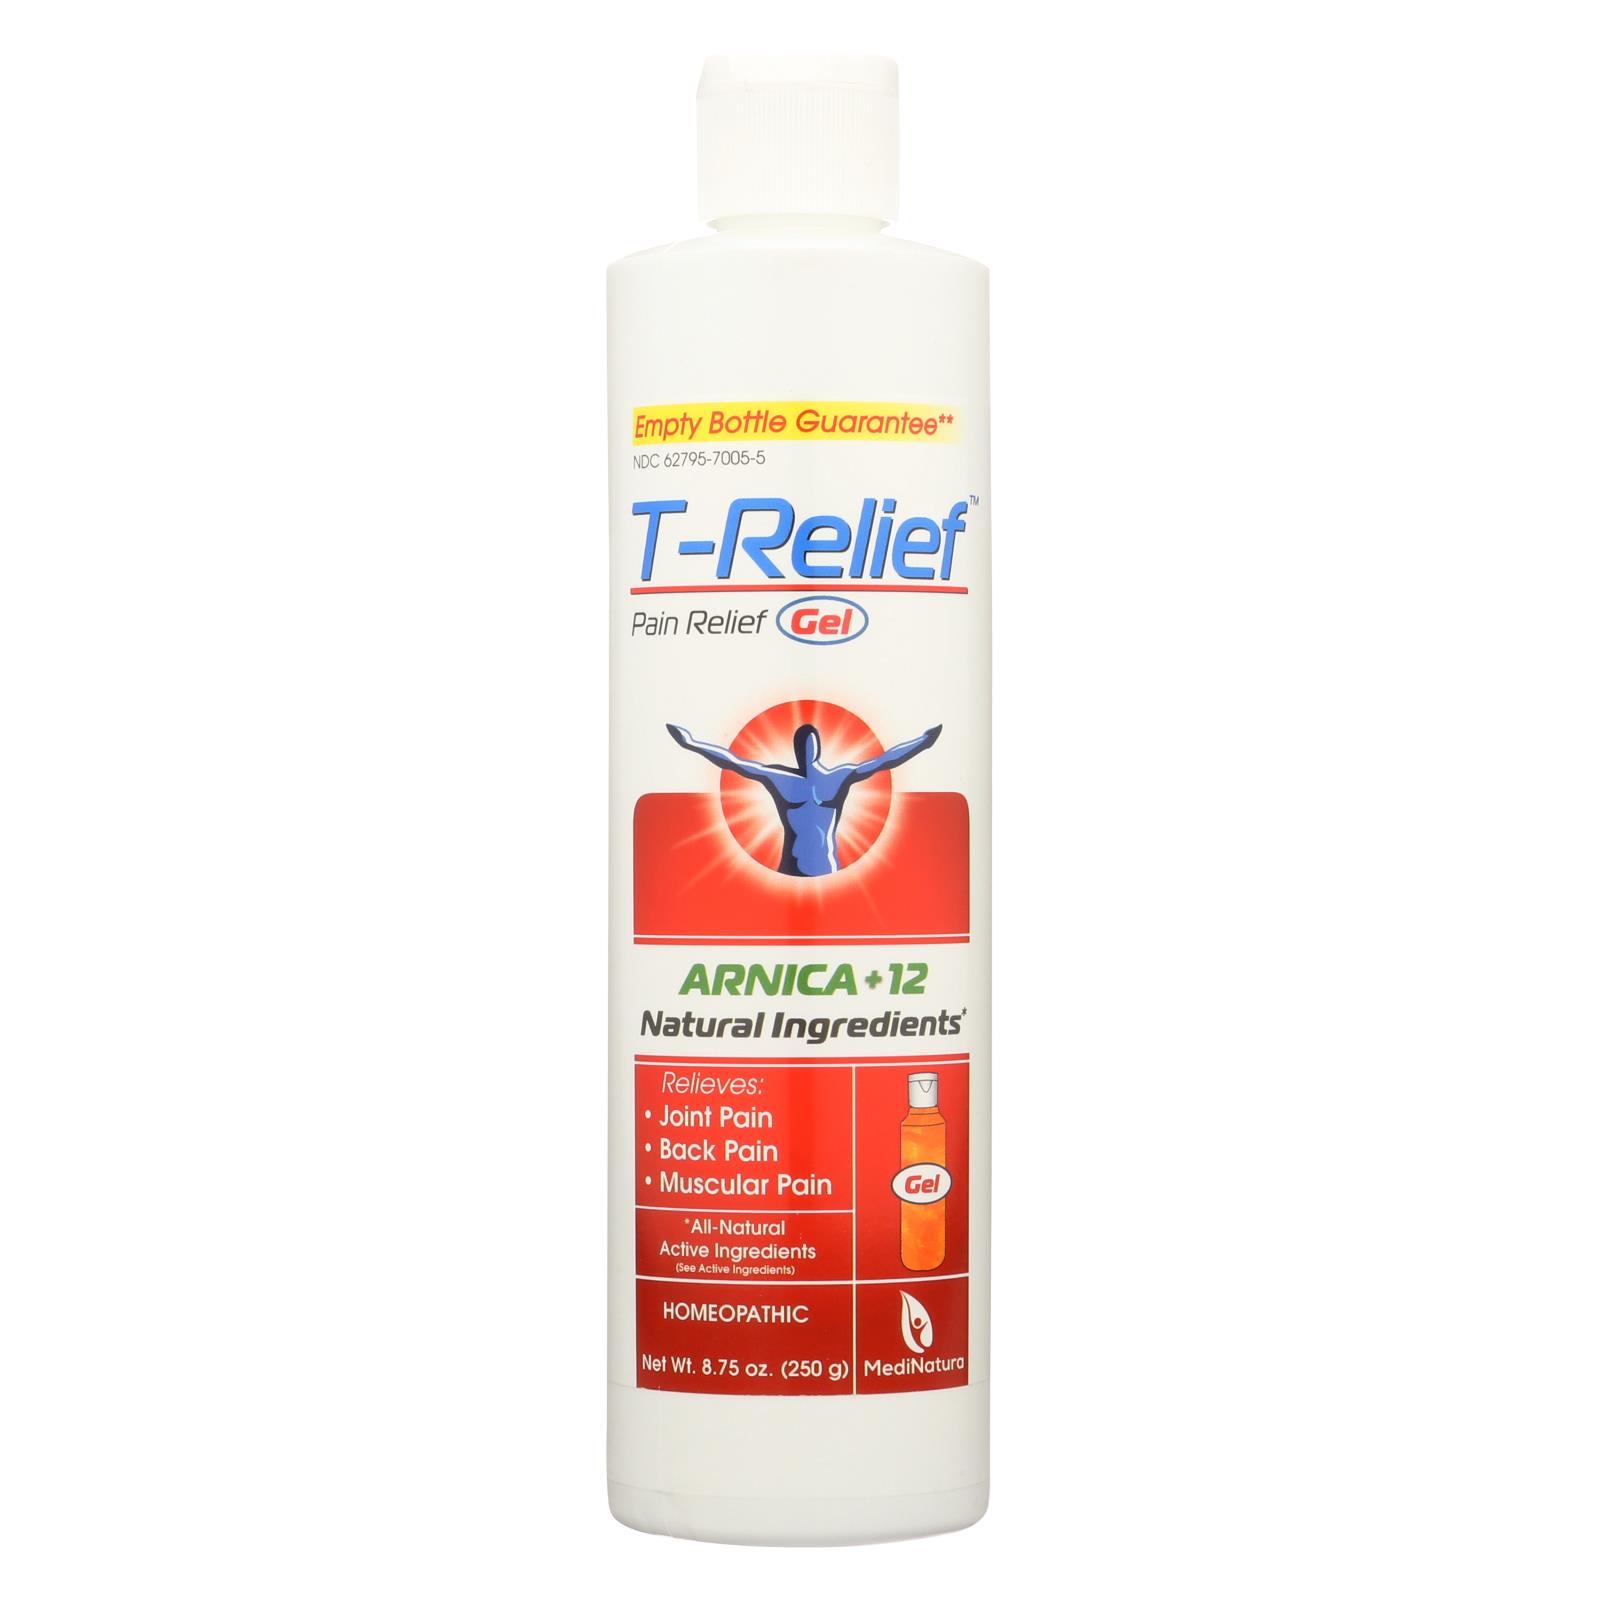 T-relief - Pain Relief Gel - Arnica - 4 Oz - Organic Health and Beauty